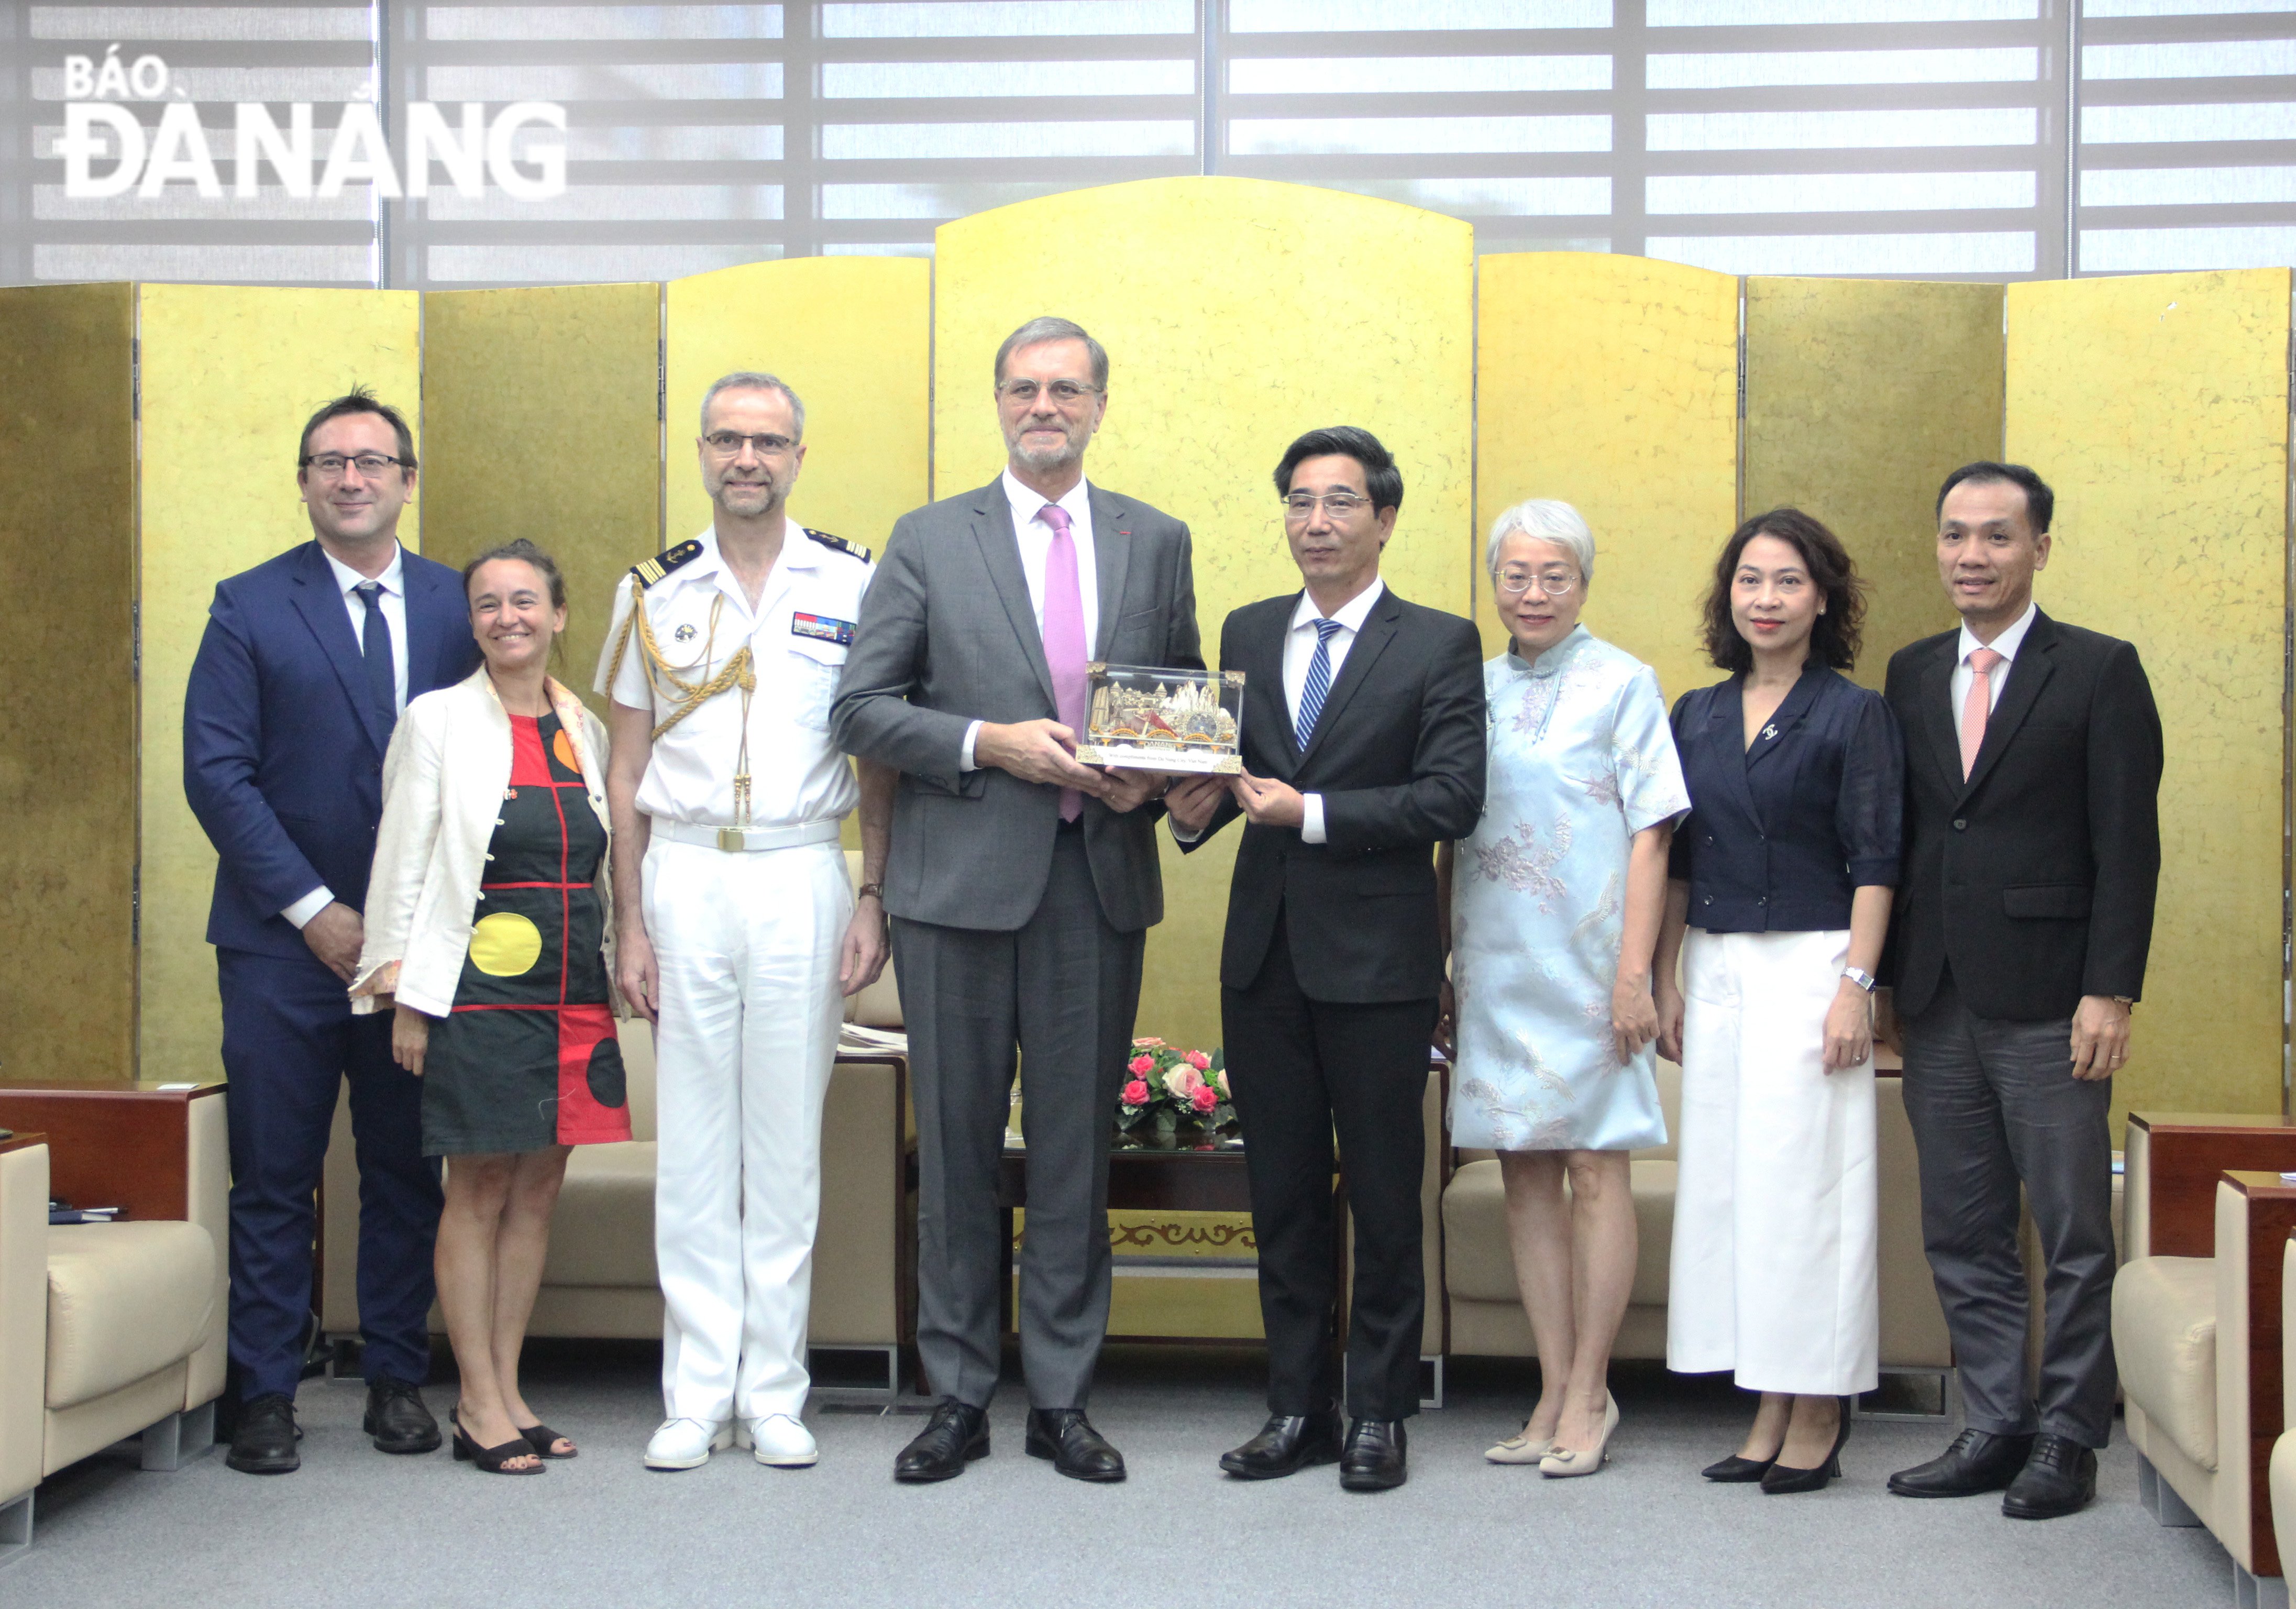 Vice Chairman of the Da Nang People's Committee Tran Chi Cuong (4th, right) presenting a souvenir to French Ambassador to Viet Nam Olivier Brochet (5th, right). Photo: X.HAU